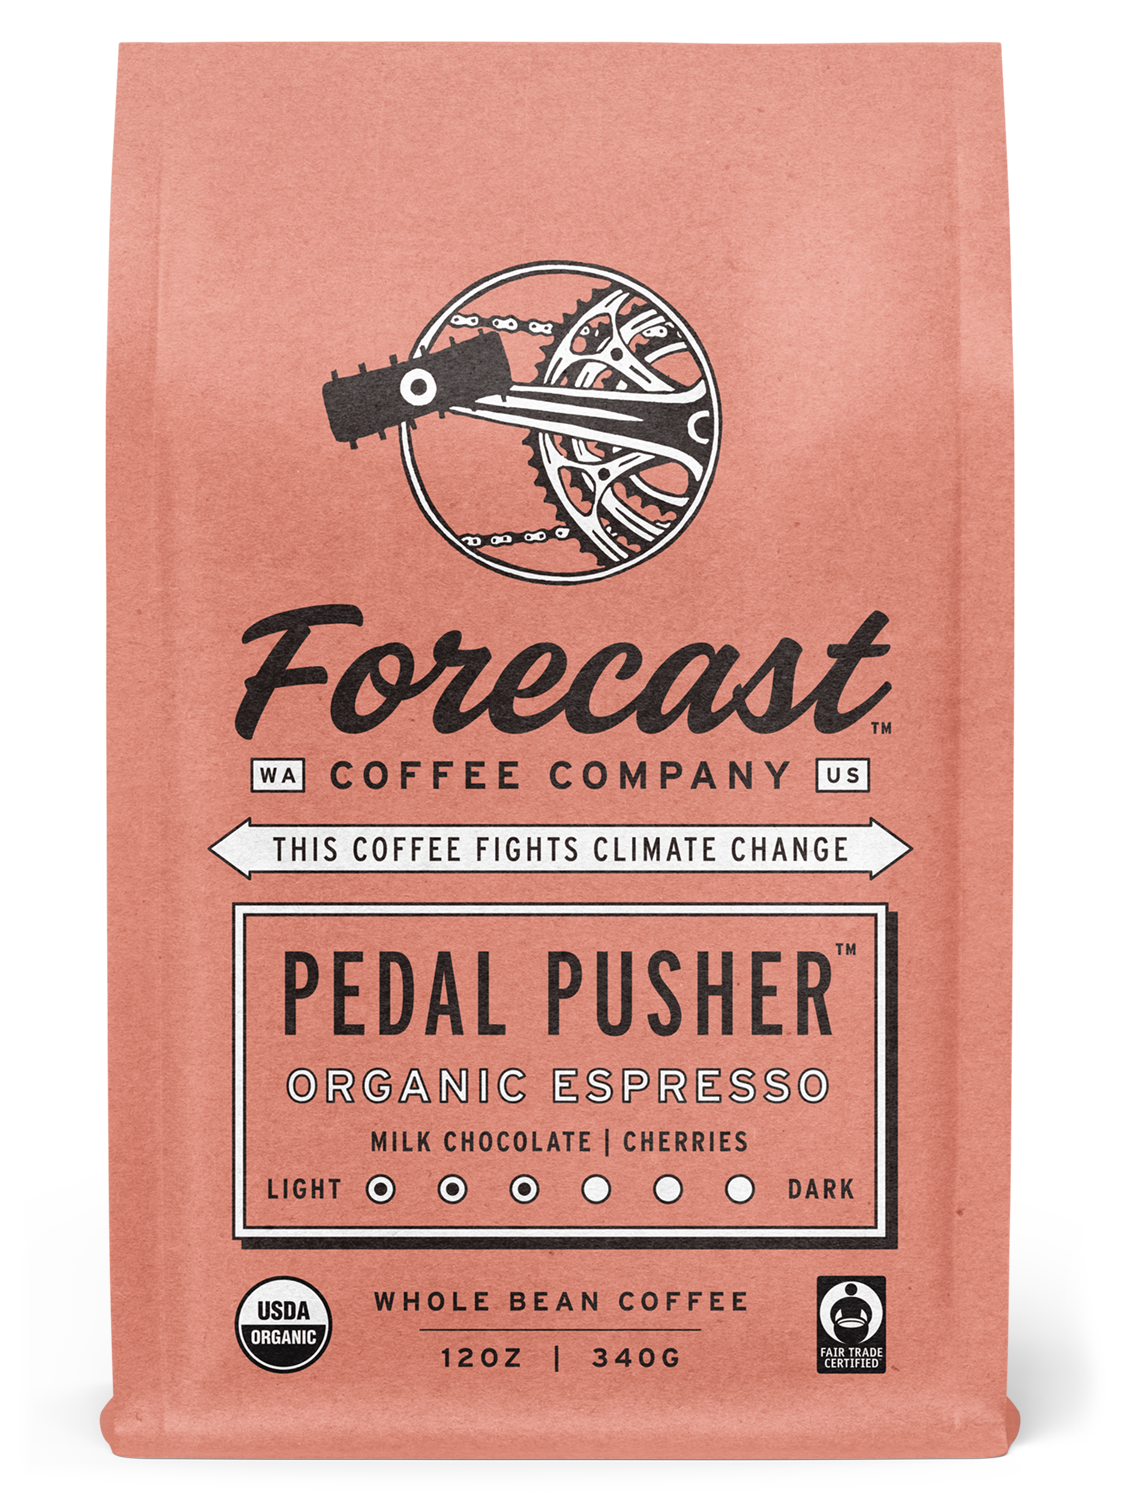 Bag of Pedal Pusher coffee